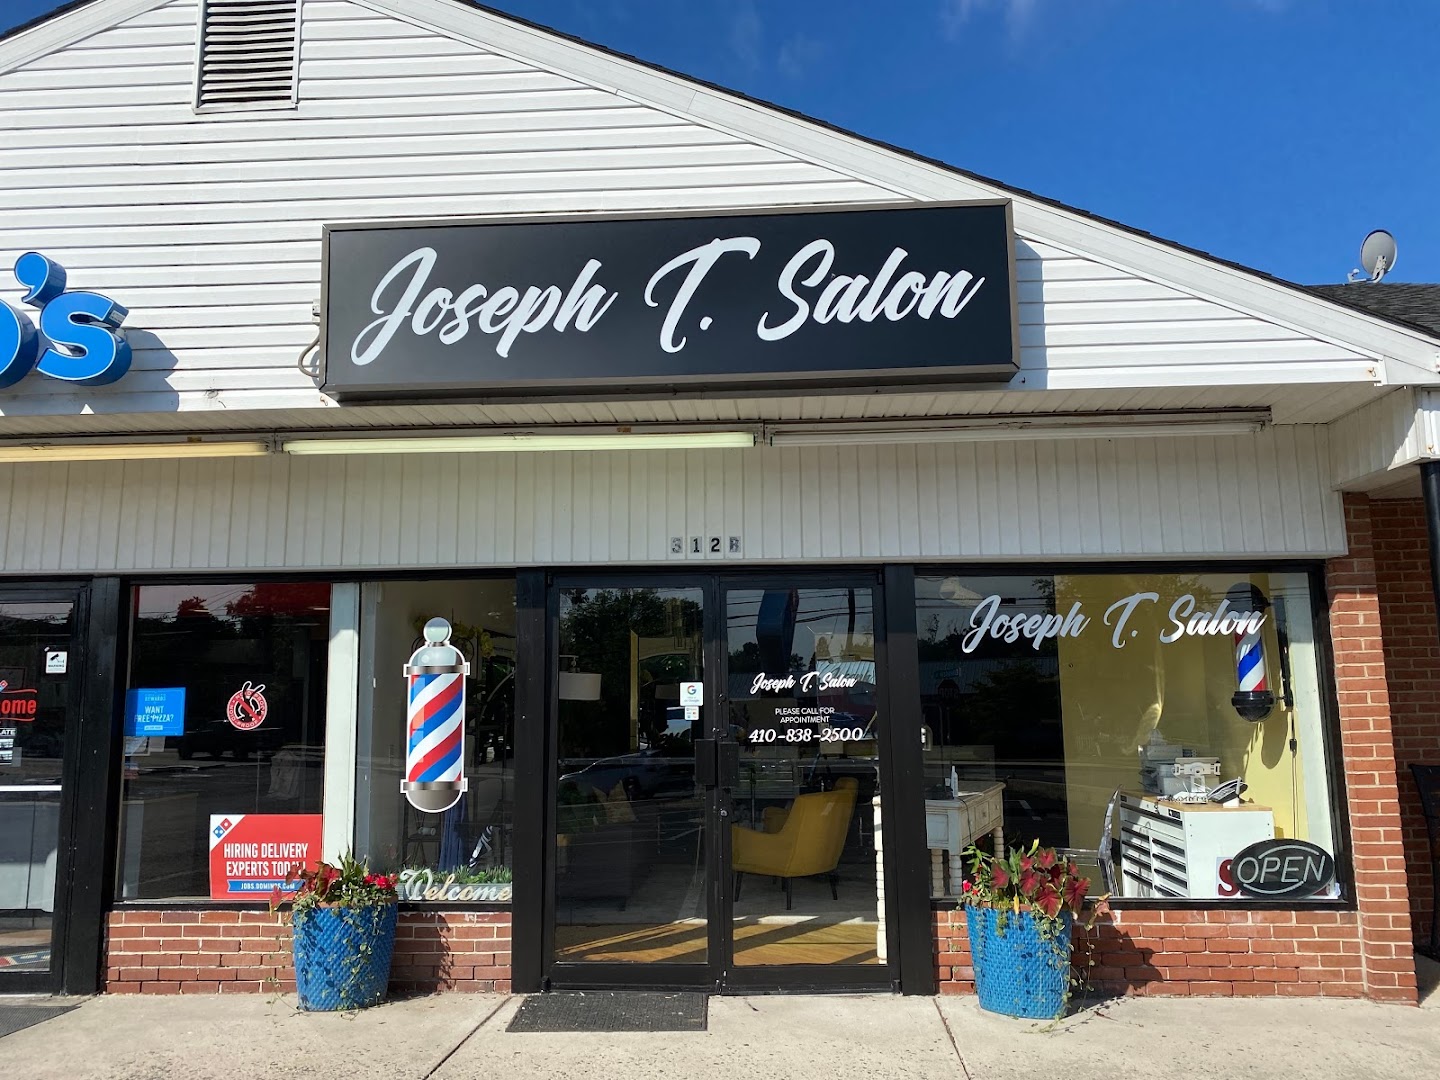 Joesph T. Salon and Barber